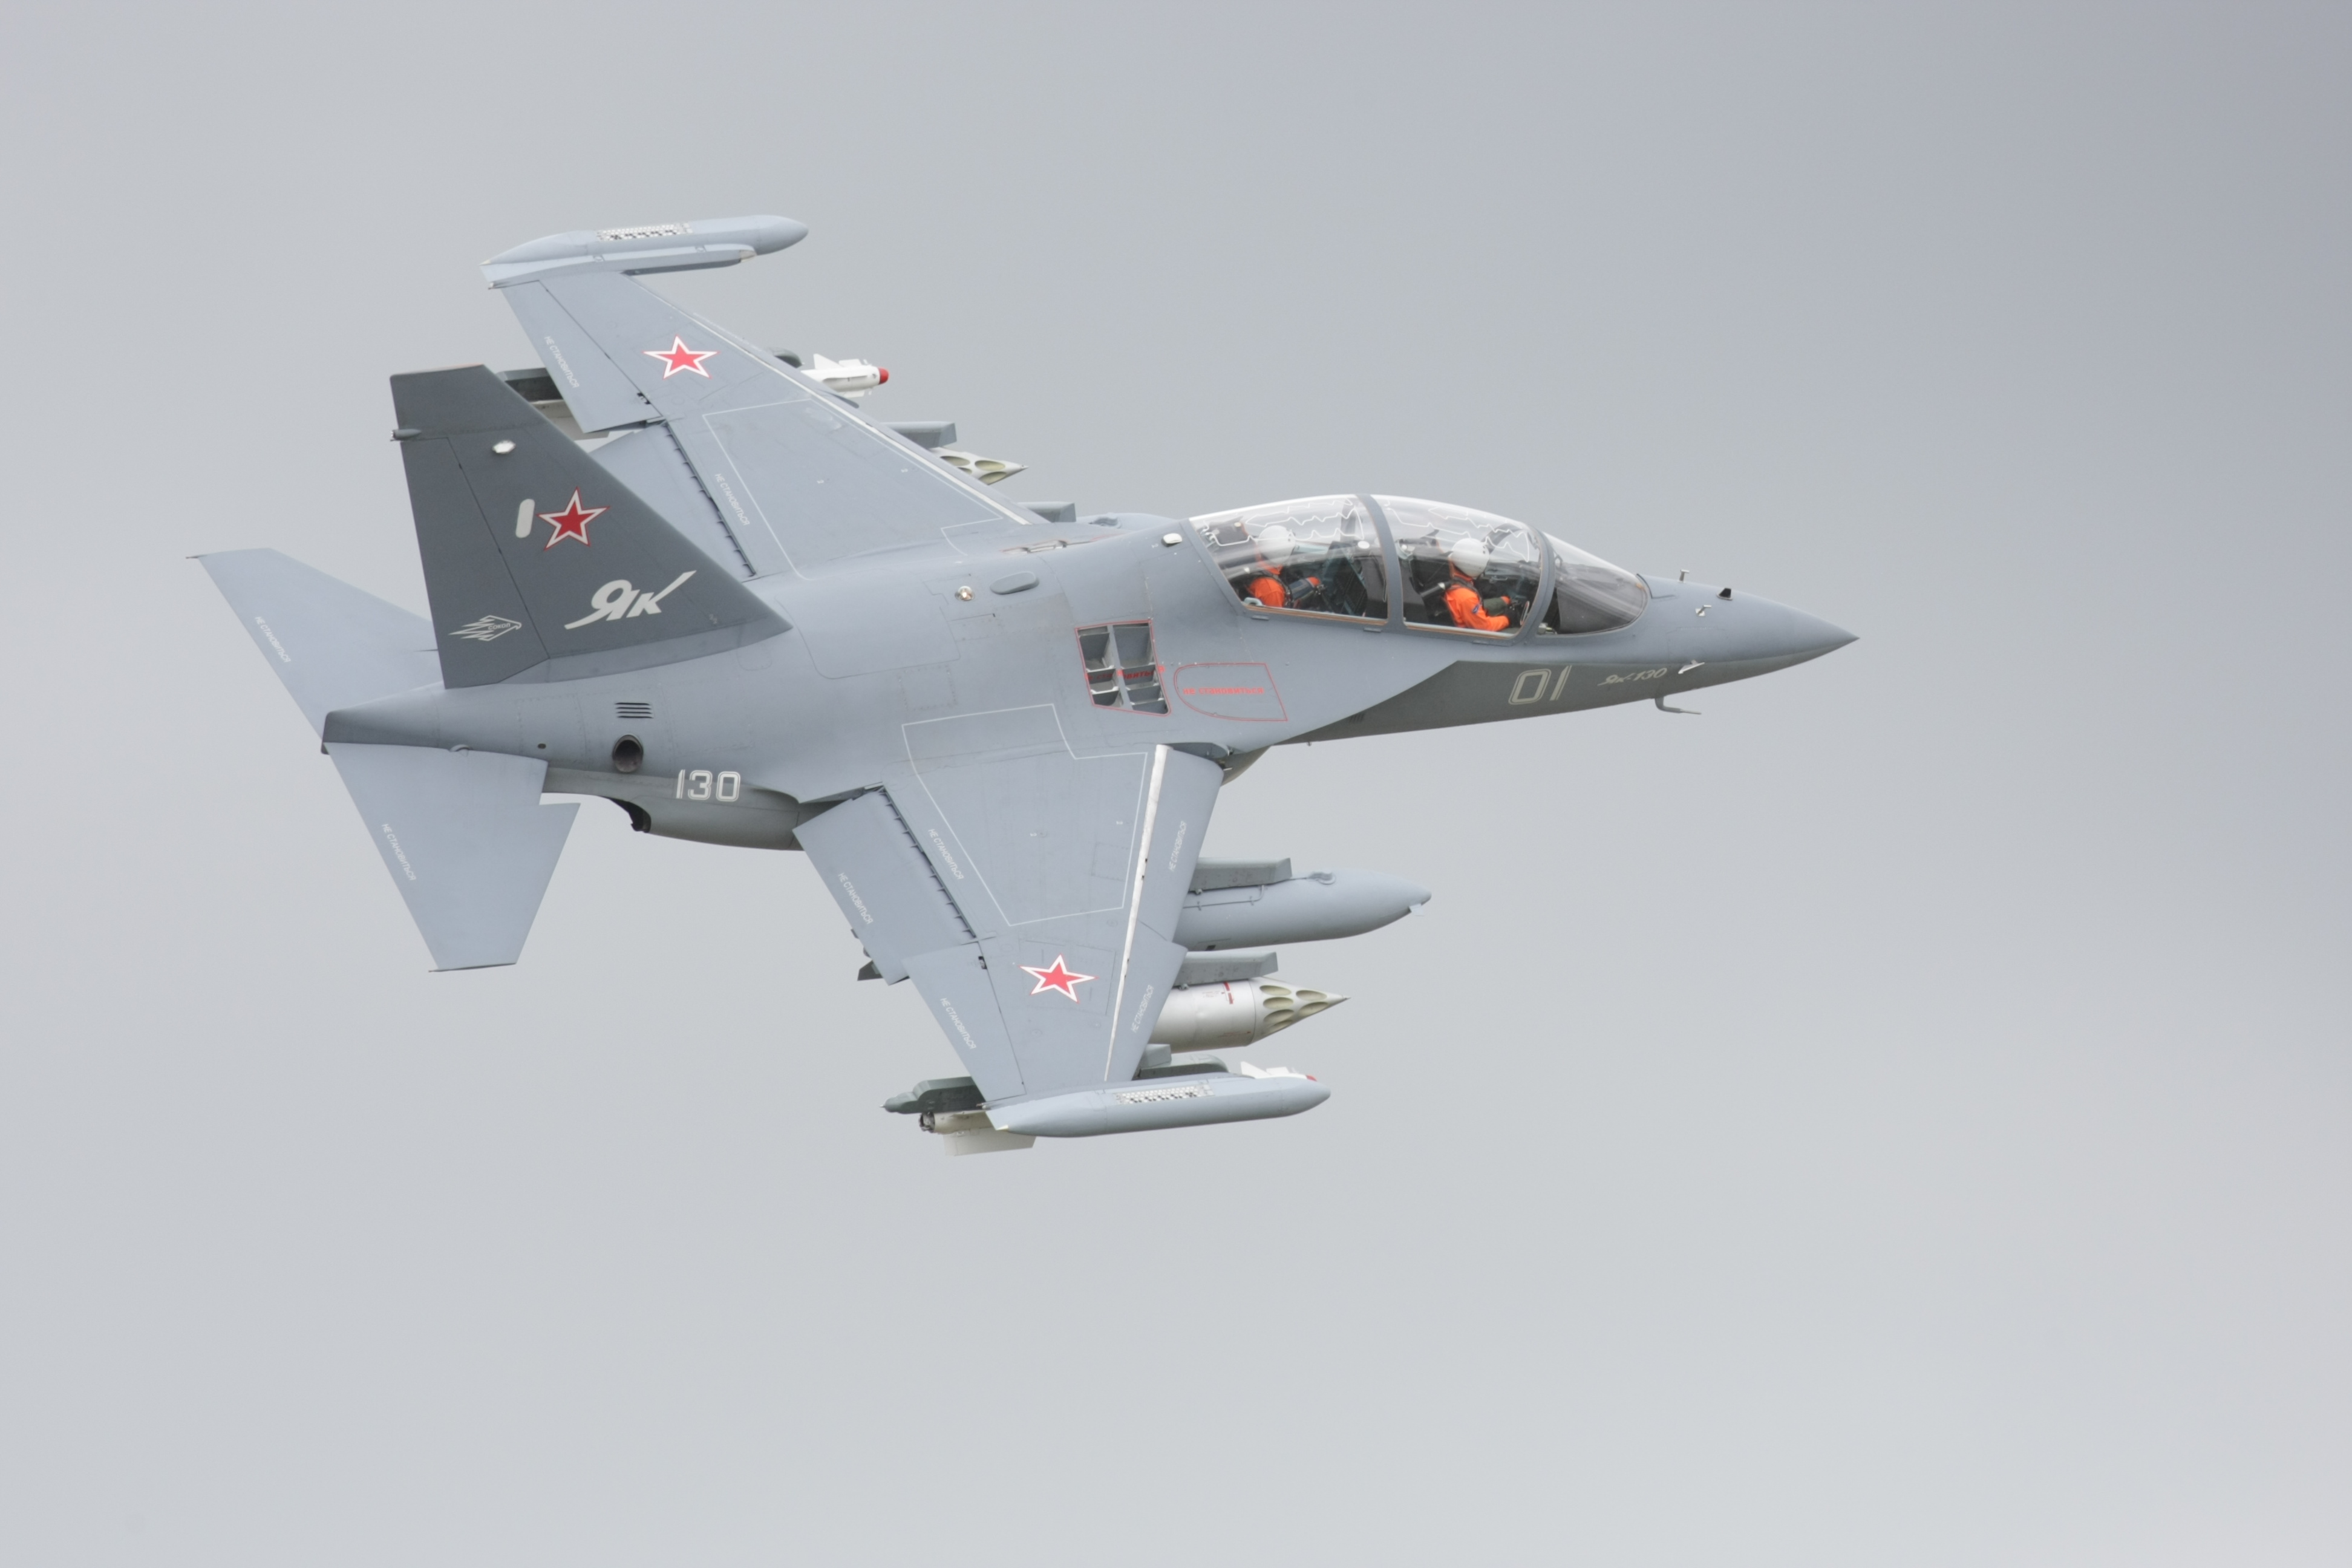 Yakovlev Yak-130 Backgrounds, Compatible - PC, Mobile, Gadgets| 3888x2592 px